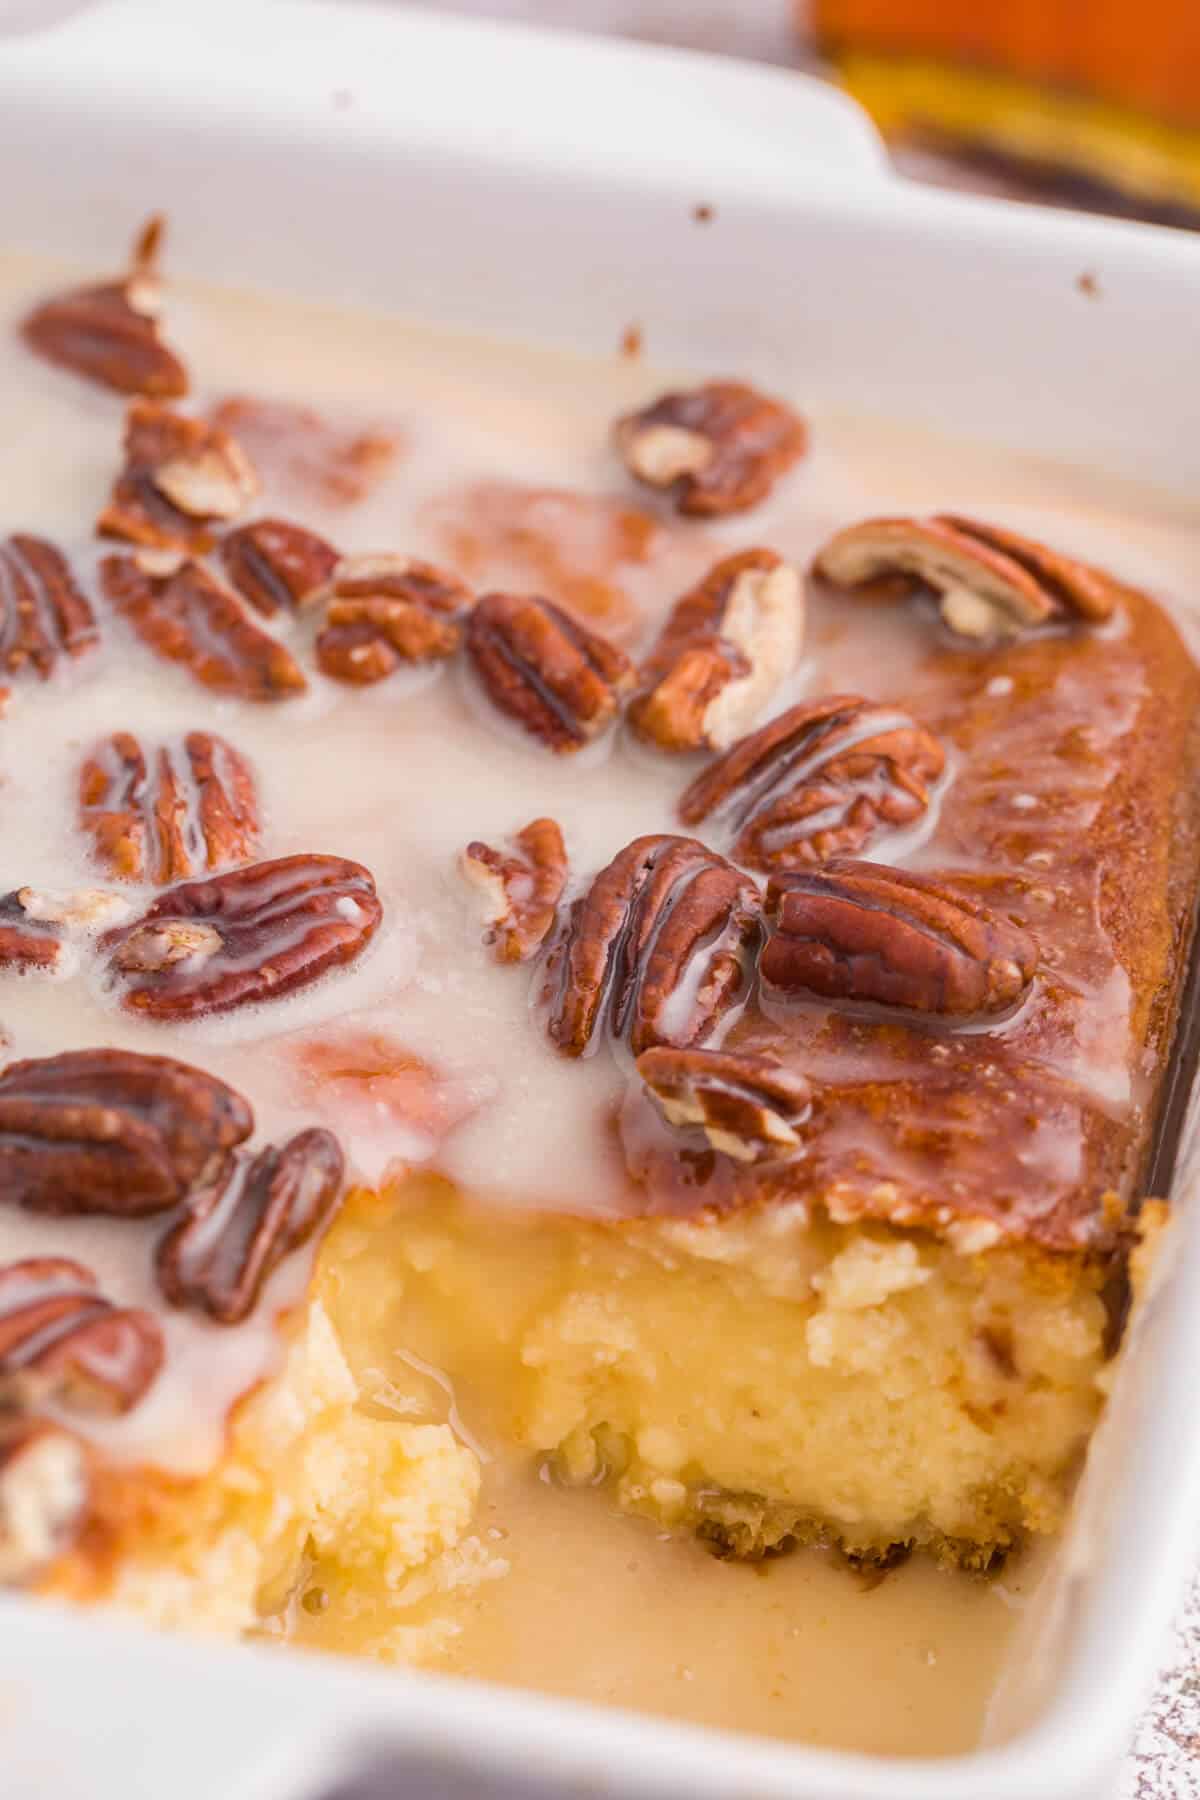 Maple pecan danish bake in a casserole dish with a piece cut out.